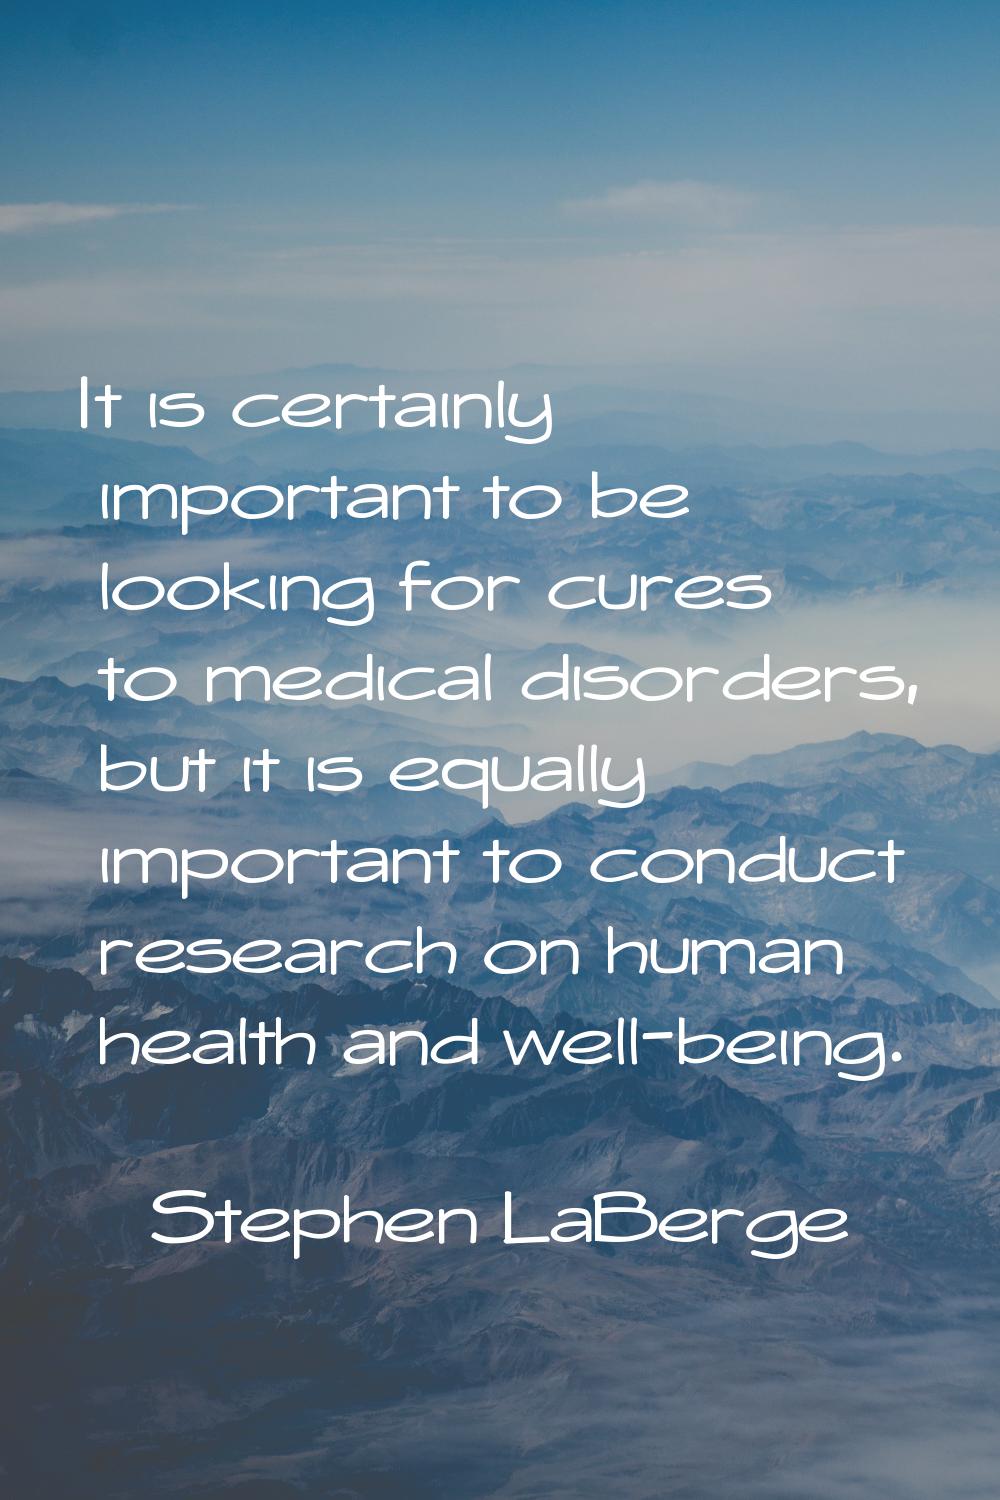 It is certainly important to be looking for cures to medical disorders, but it is equally important